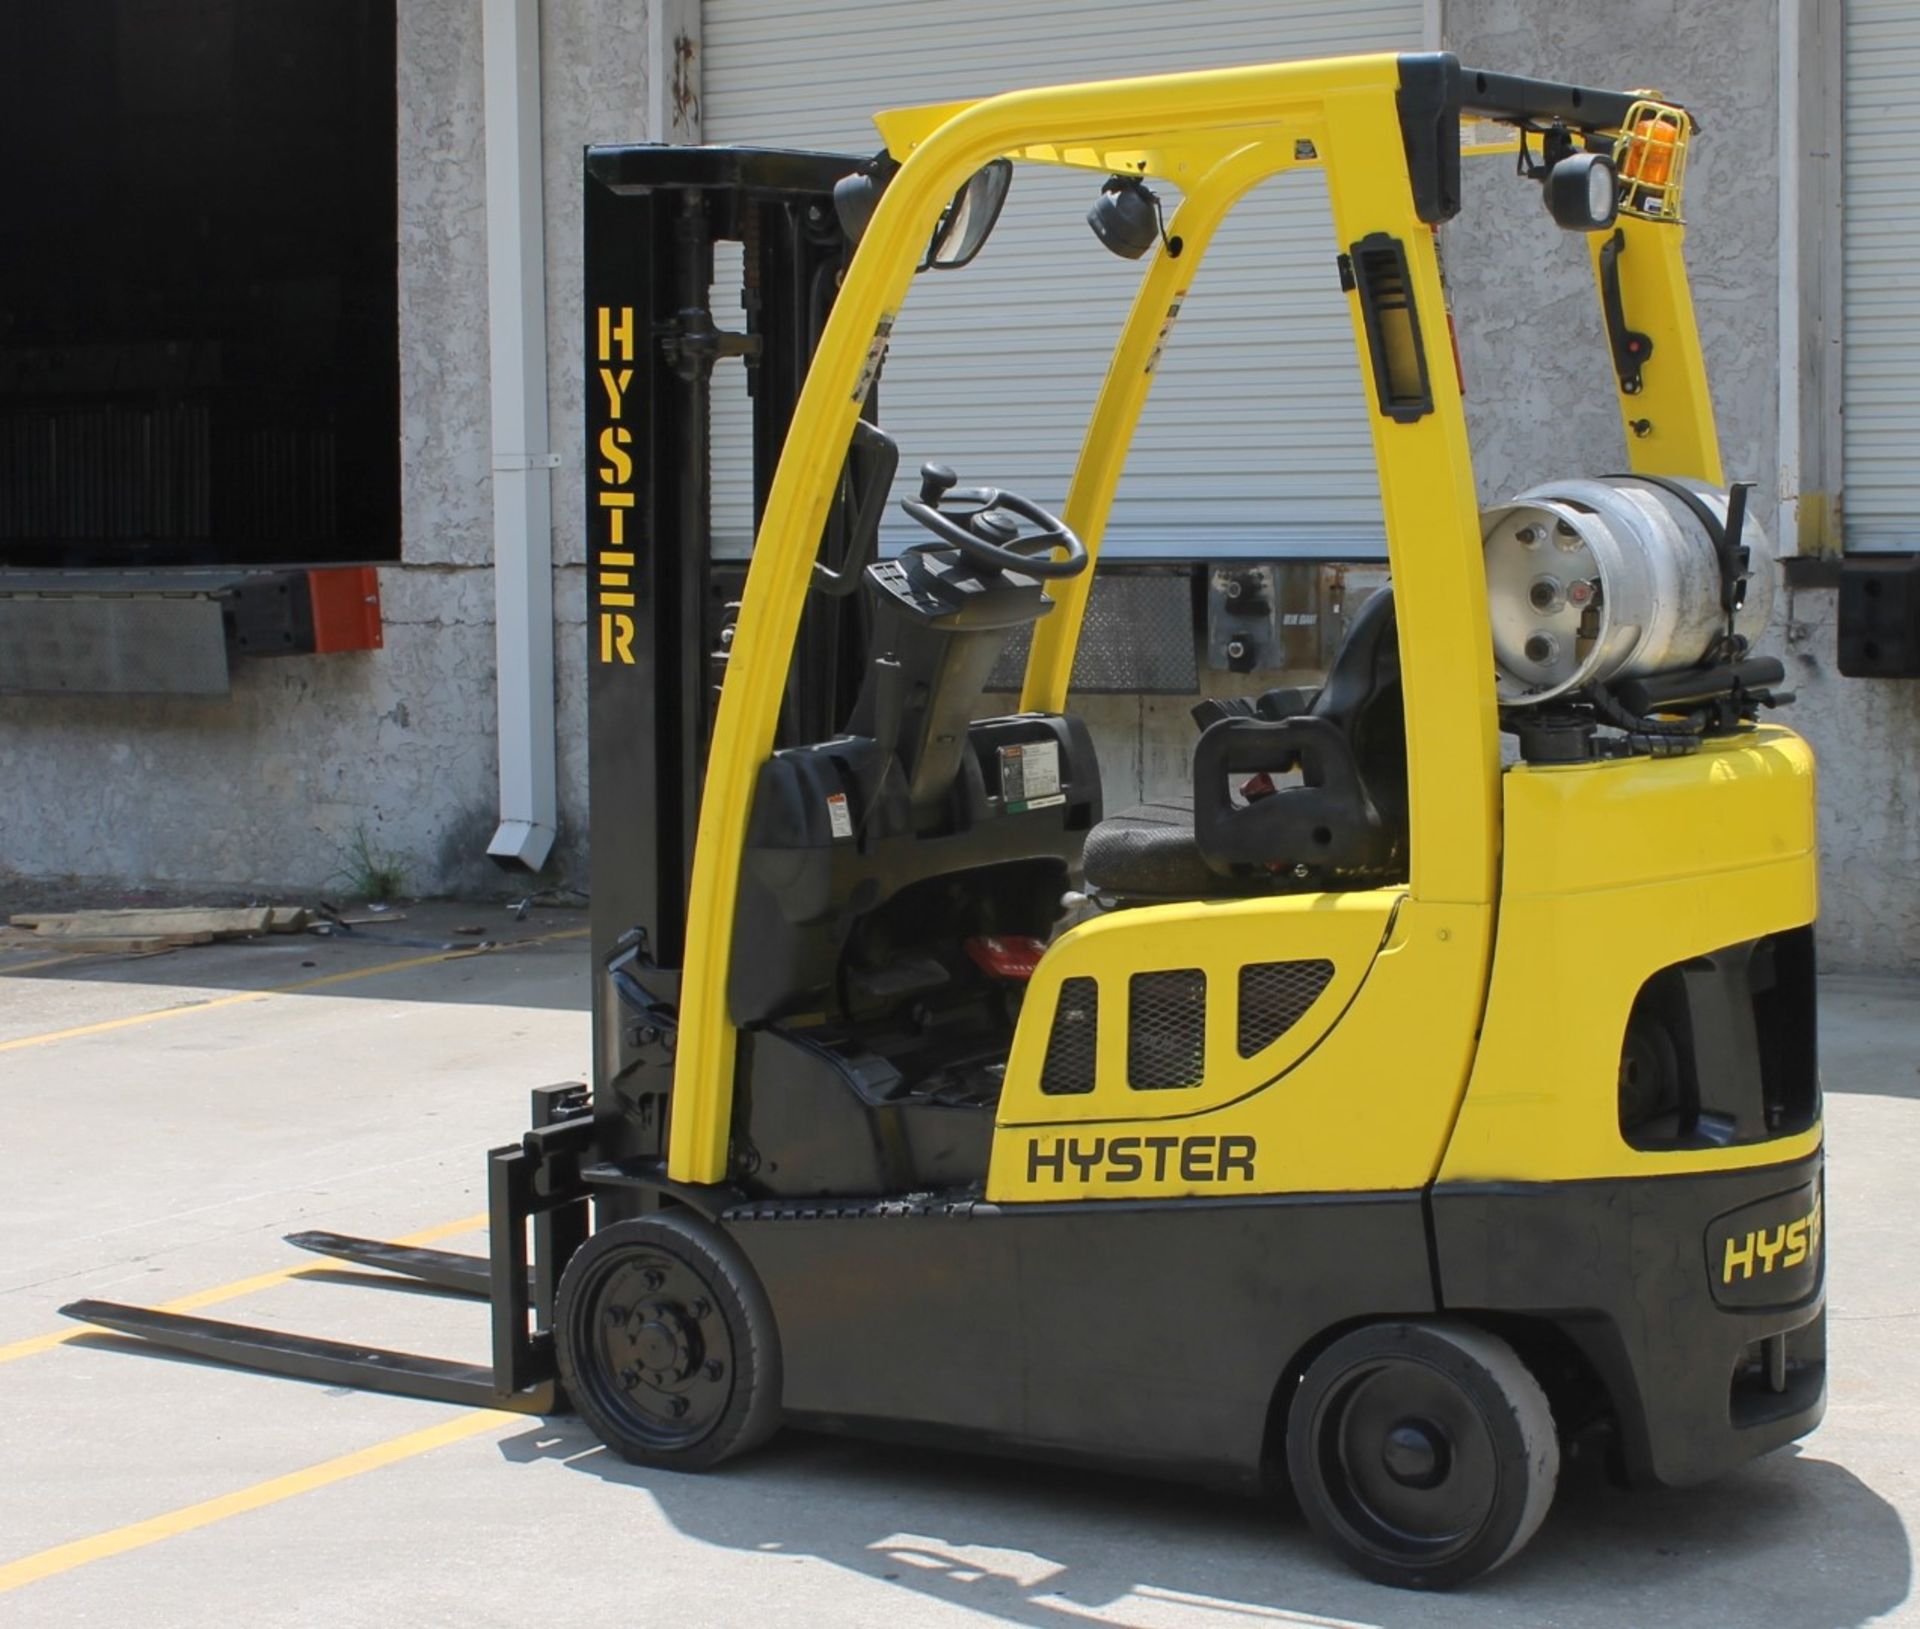 2007 HYSTER 3000 LBS. CAPACITY PROPANE FORKLIFT, - Image 3 of 7